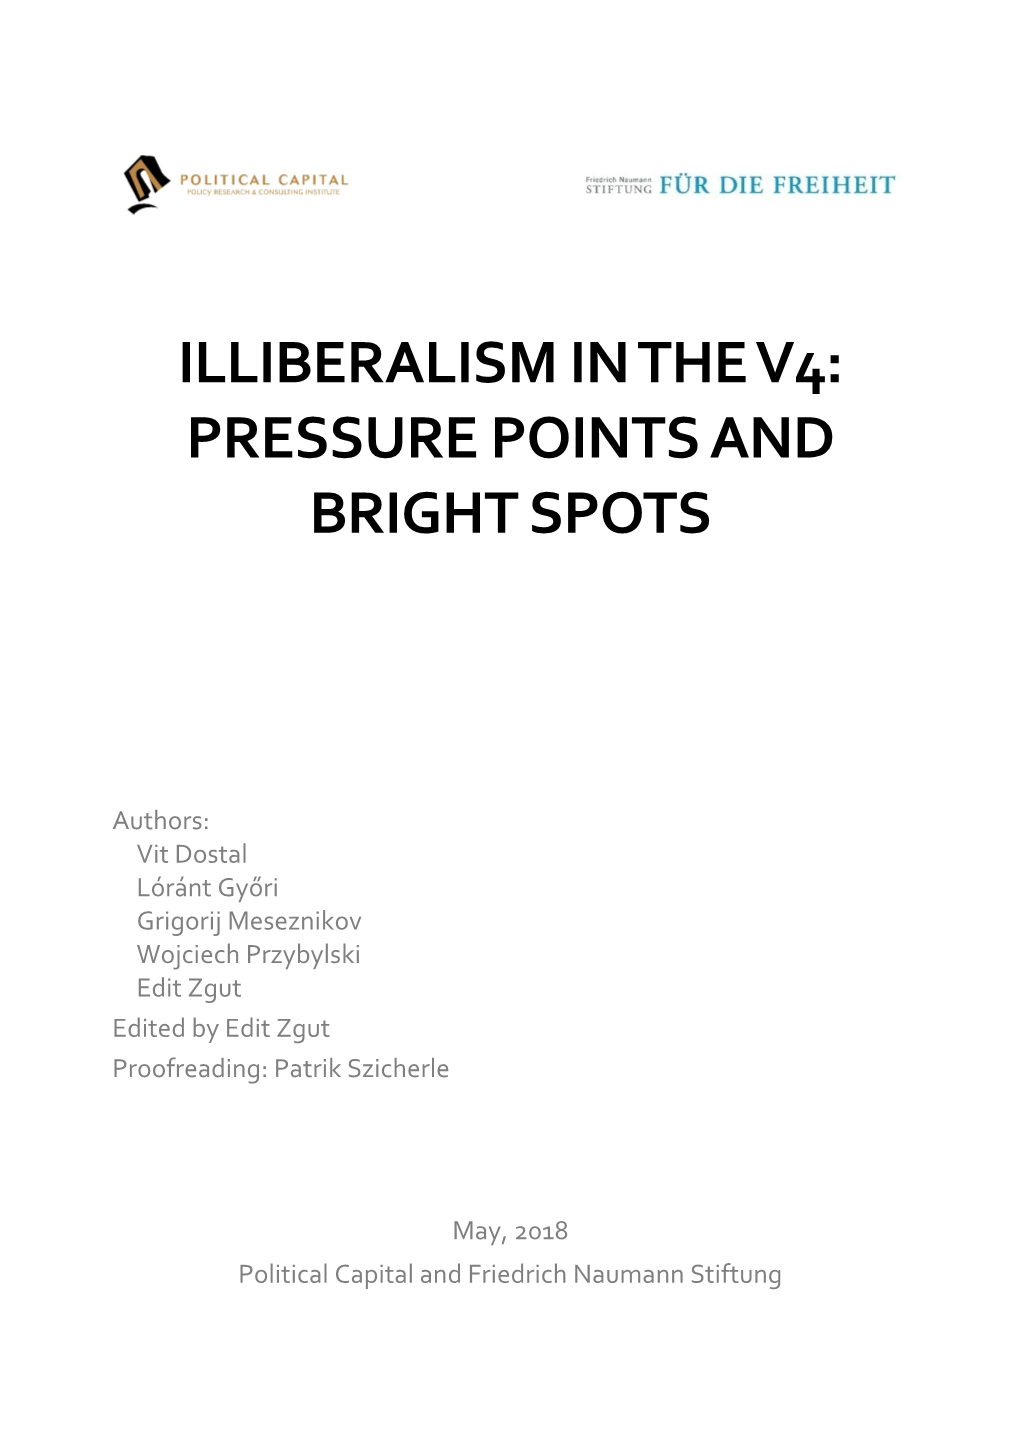 Illiberalism in the V4: Pressure Points and Bright Spots